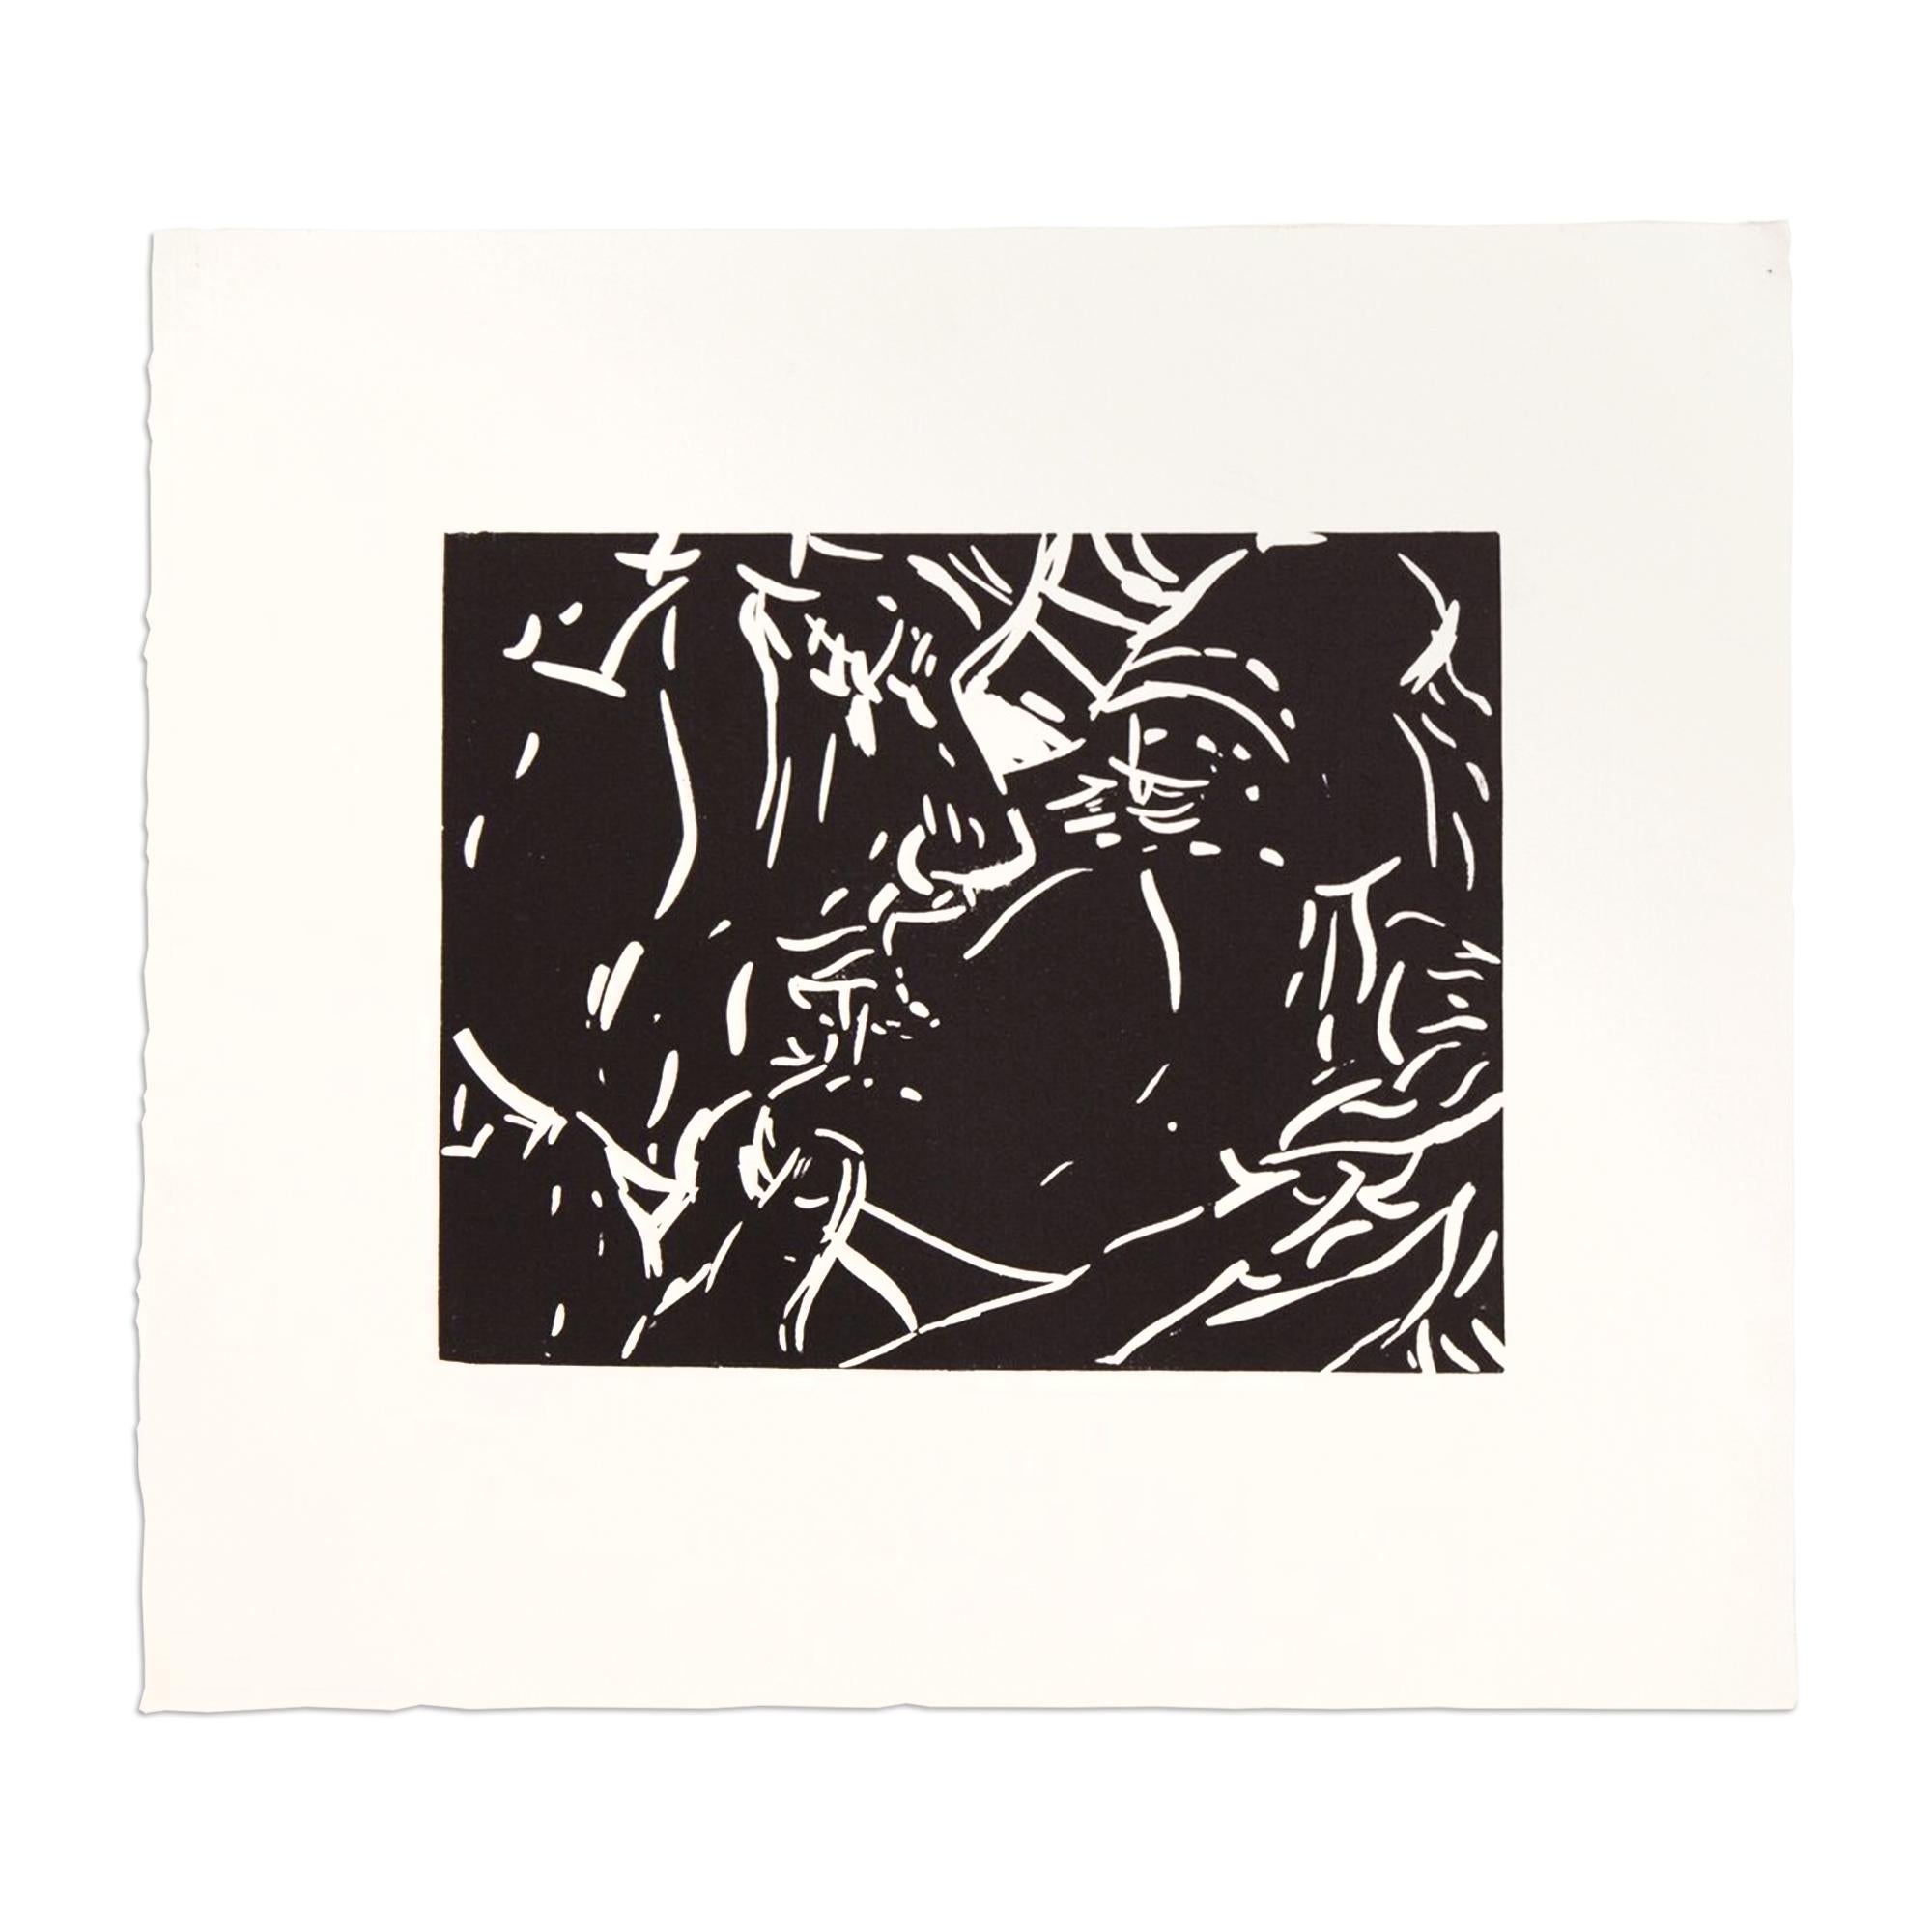 Elizabeth Peyton (American, b. 1965)
The Kiss, 2018
Medium: Etching on wove paper
Dimensions: 33 x 37 cm
Edition of 30: Hand-signed and numbered
Condition: Mint